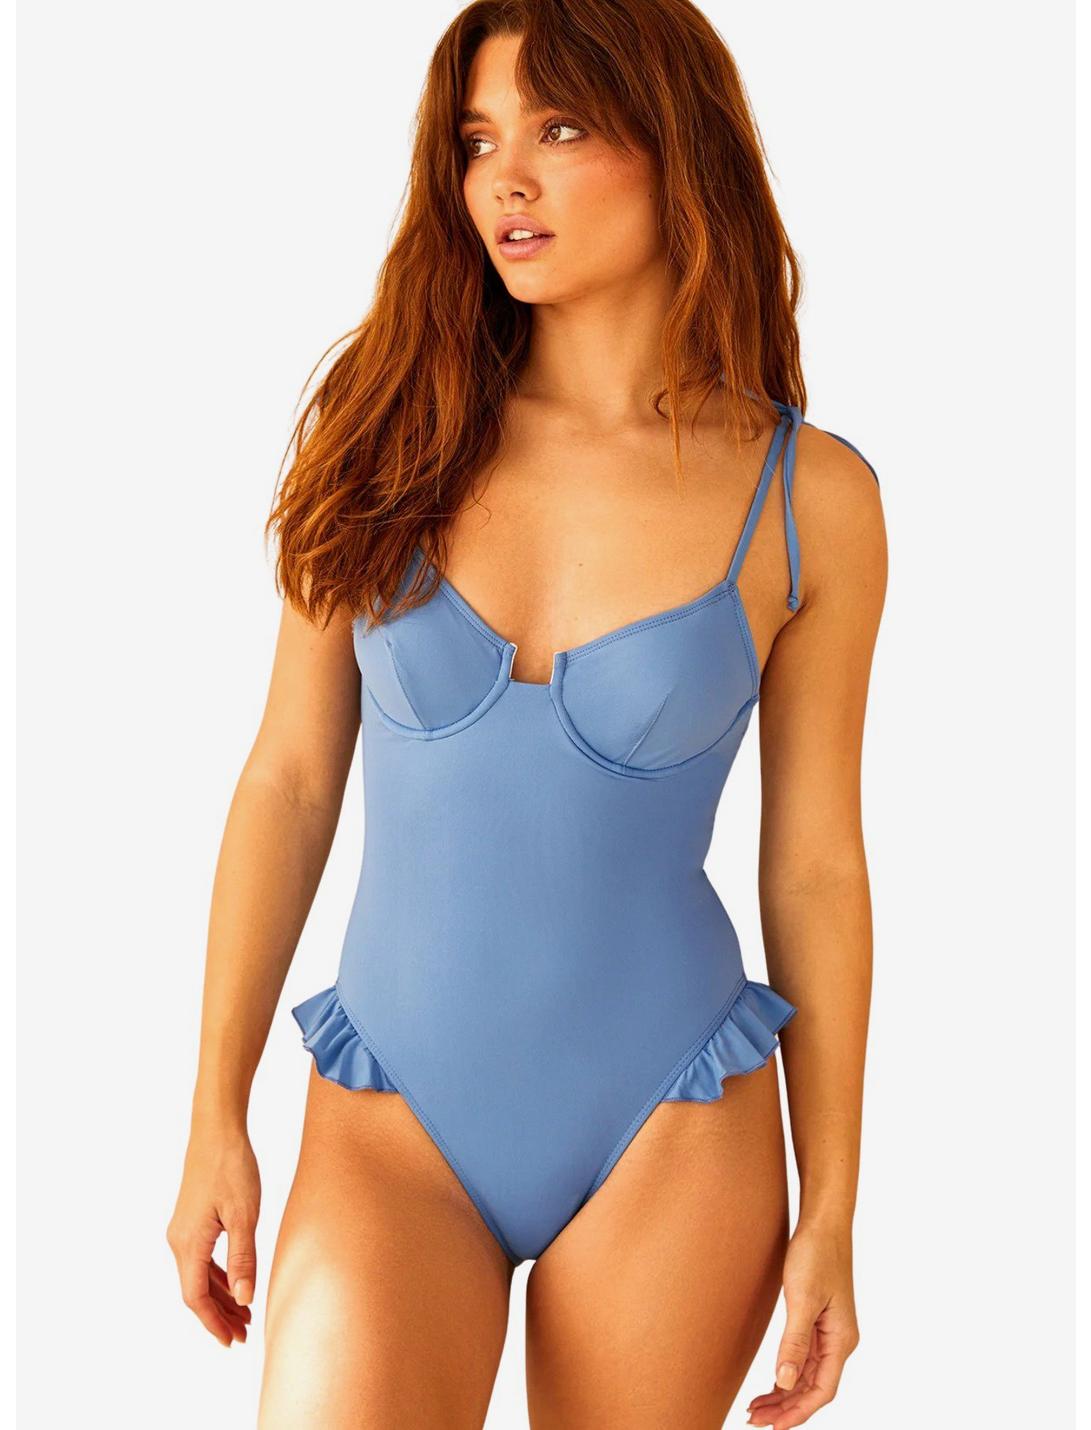 Dippin' Daisy's Angelic Swim One Piece South Pacific Blue, POWDER BLUE, hi-res